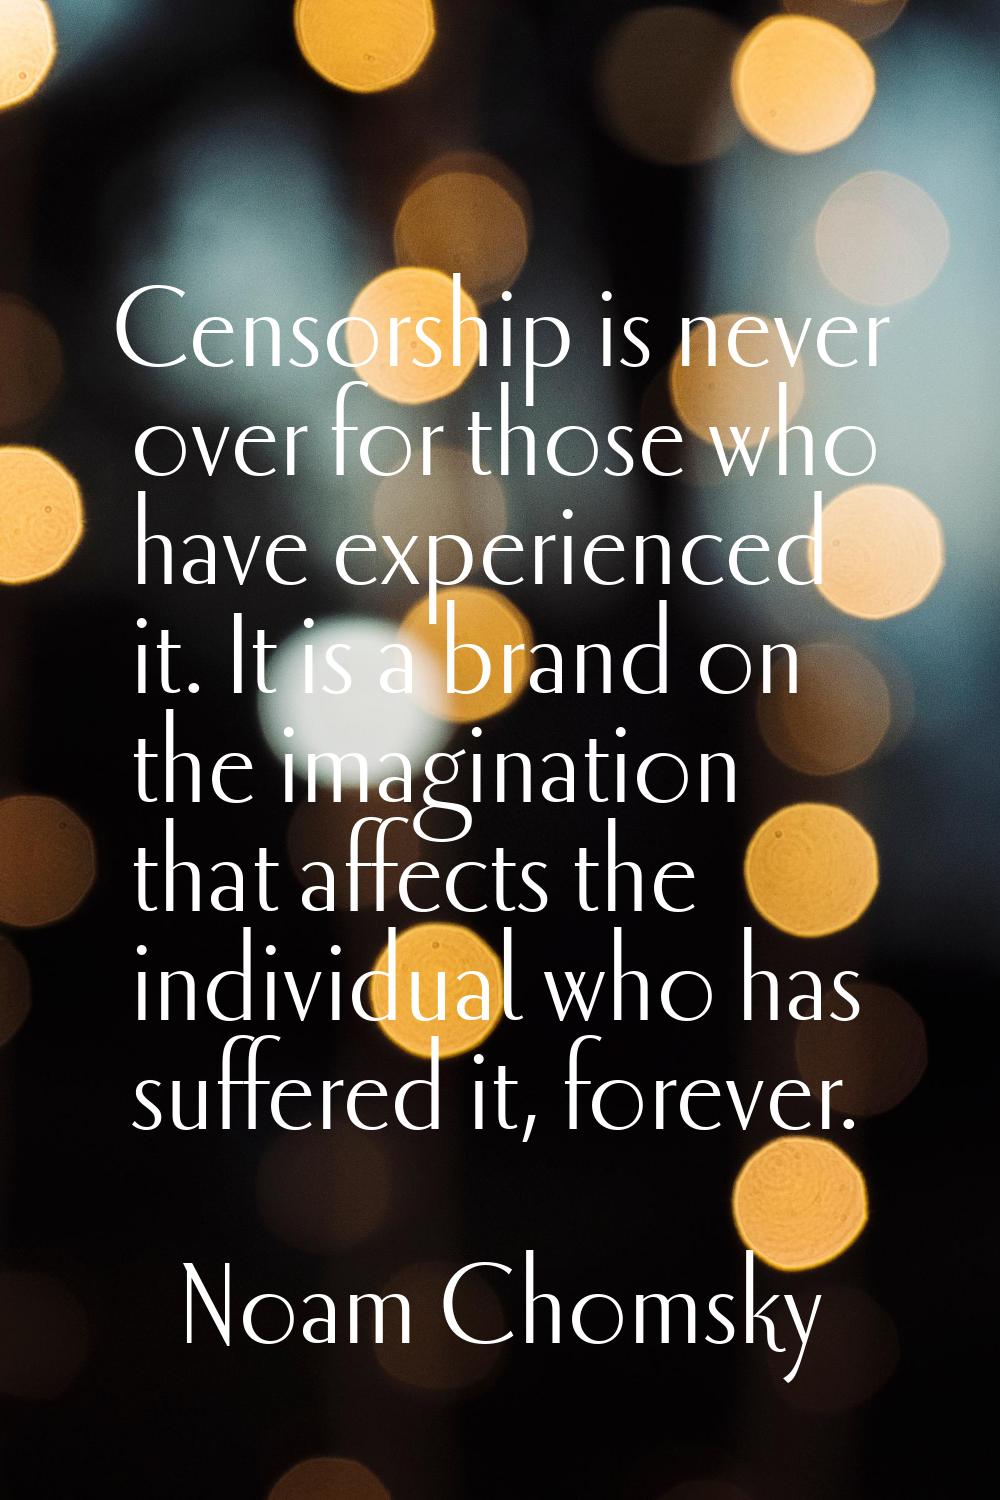 Censorship is never over for those who have experienced it. It is a brand on the imagination that a